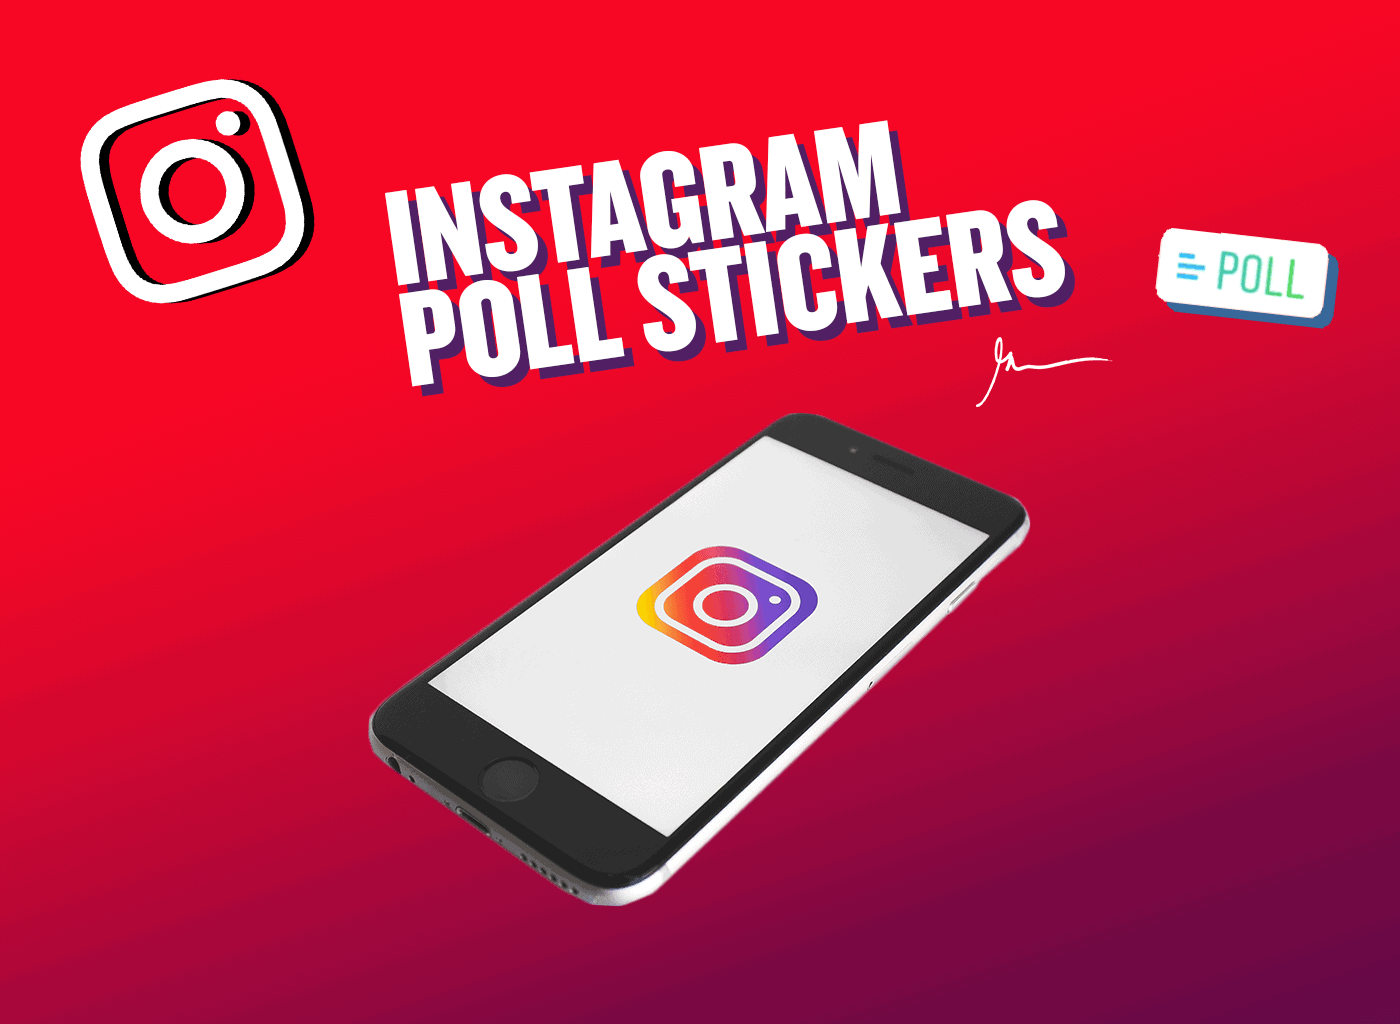 Instagram Poll Stickers: What Marketers Should Be Thinking About